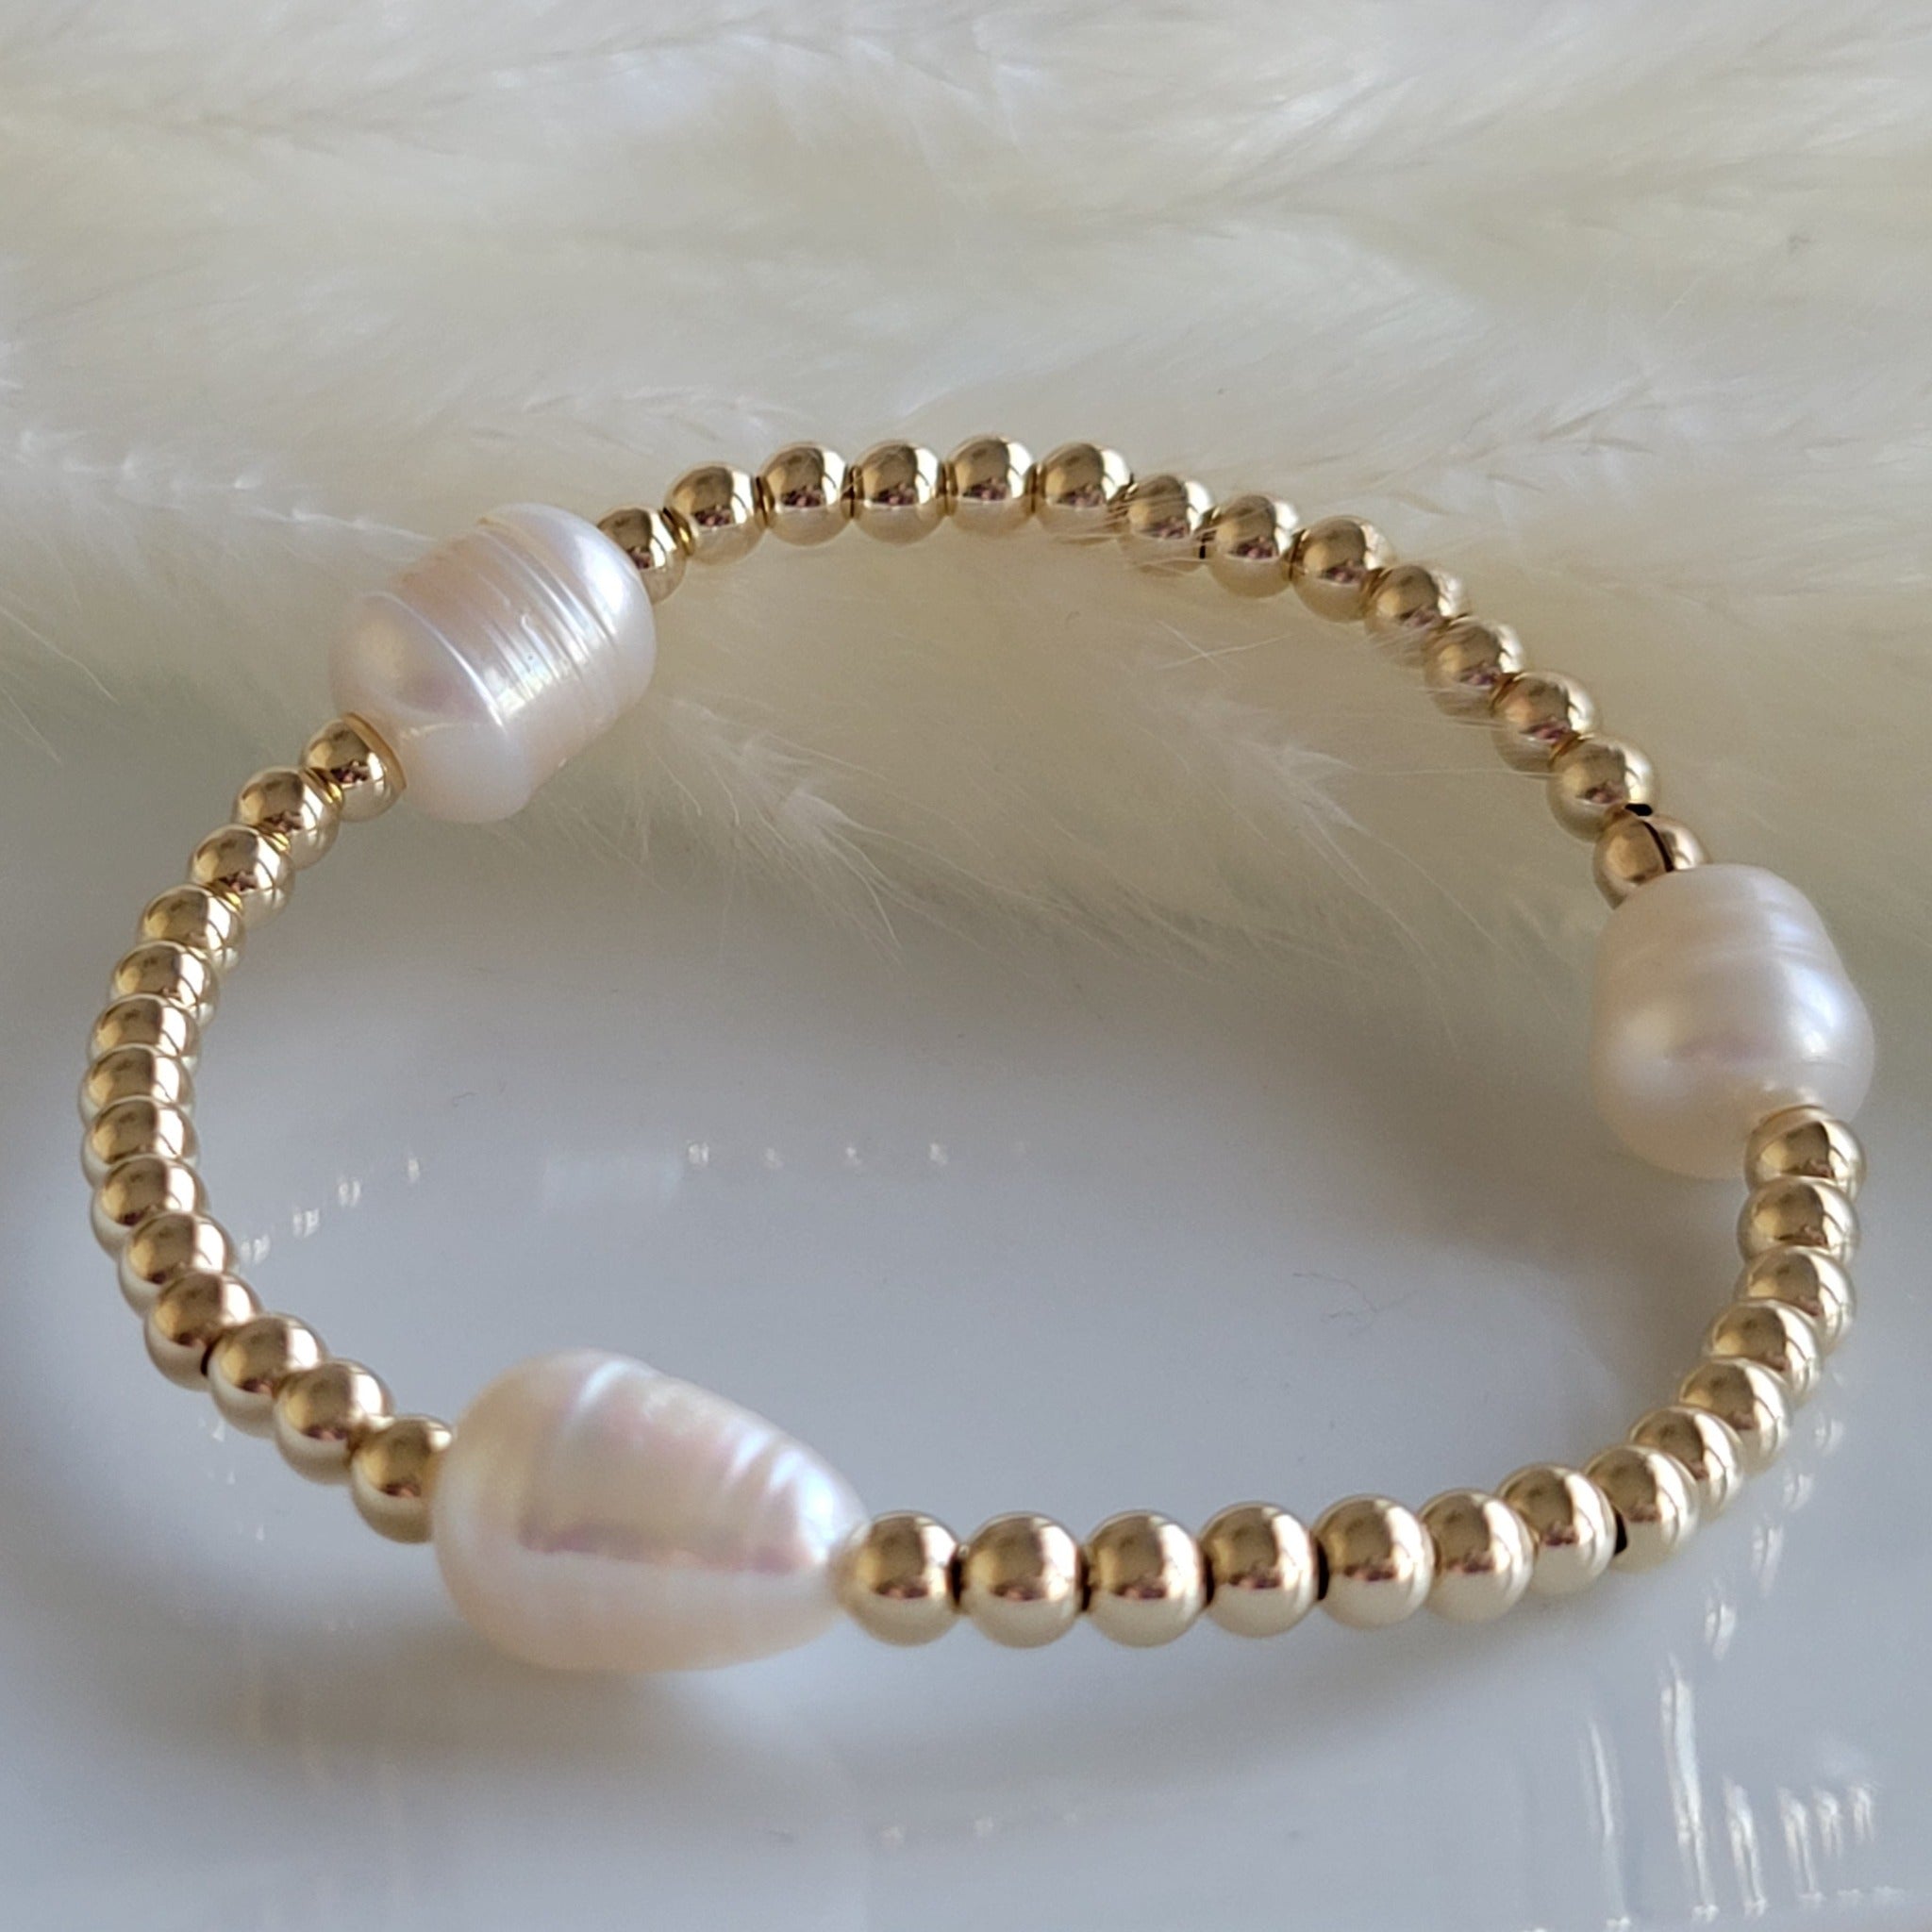 Beaded and Raw Pearl Layering Bracelet - Sterling or Gold - Black or White Pearls